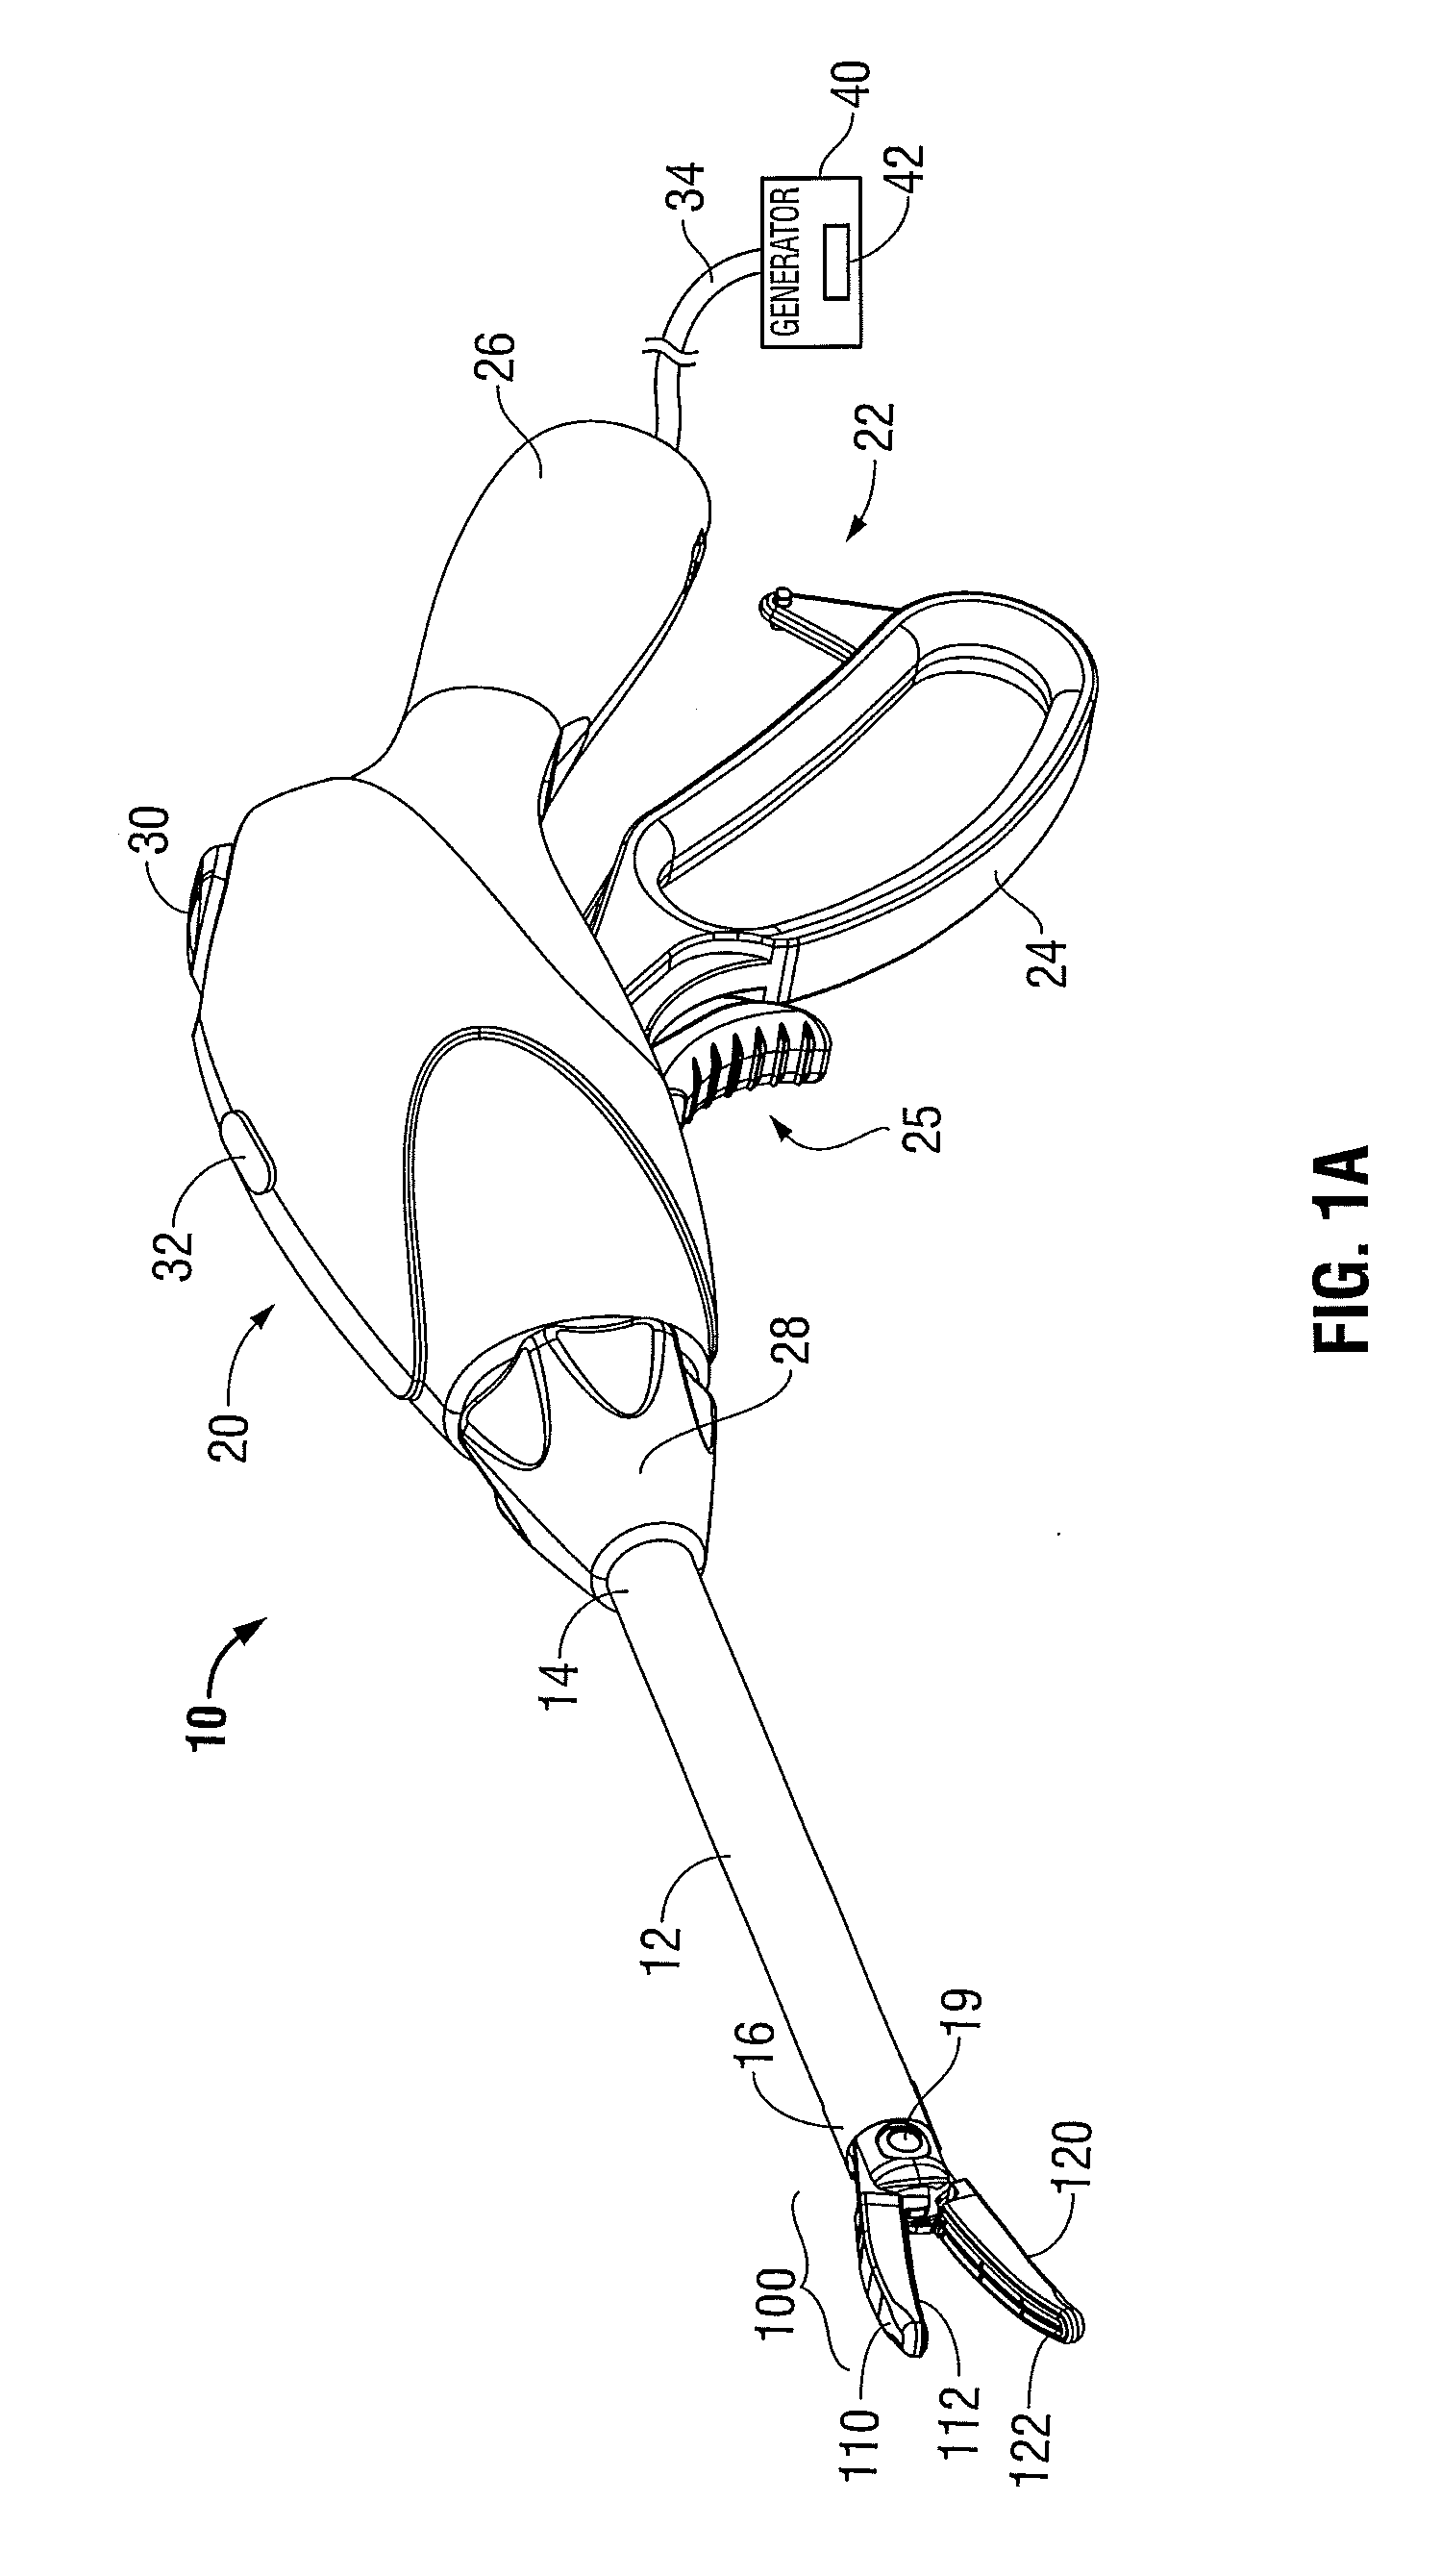 Light Energy Sealing, Cutting and Sensing Surgical Device